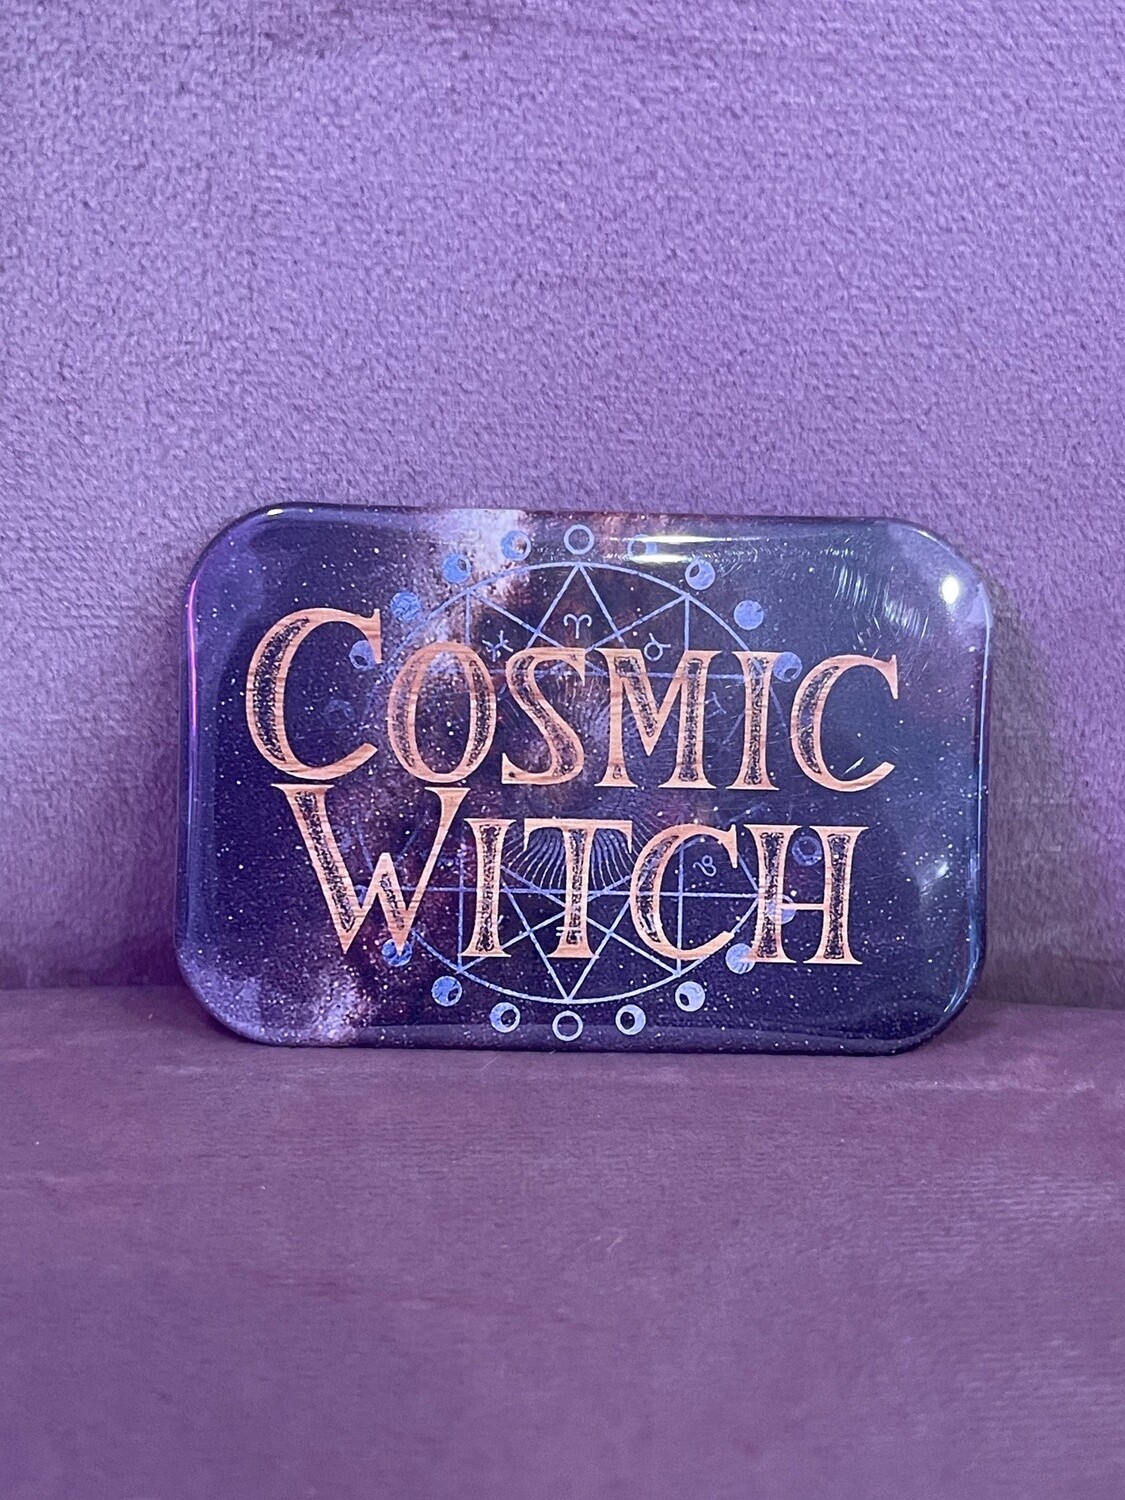 Cosmic Witch 2" x 3" Magnet